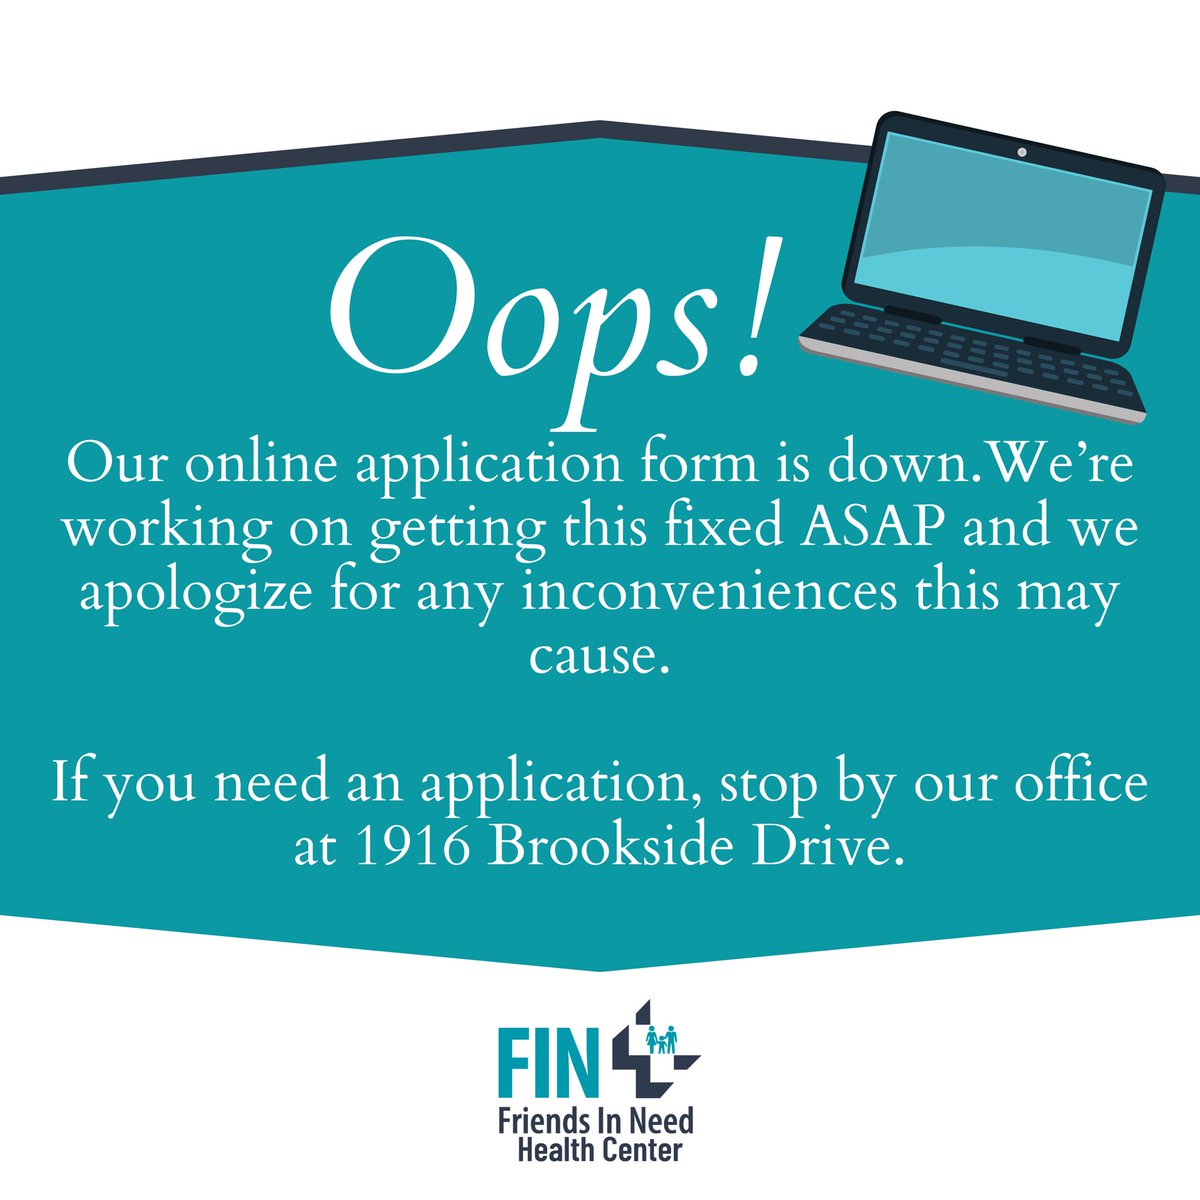 Oops! Our online application form is currently down. We apologize for any inconvenience this may cause! Please visit our office at 1916 Brookside Drive to pick up an application, or send us a message for us to mail you an application! 
#kingsport #tricitiestn #nonprofit